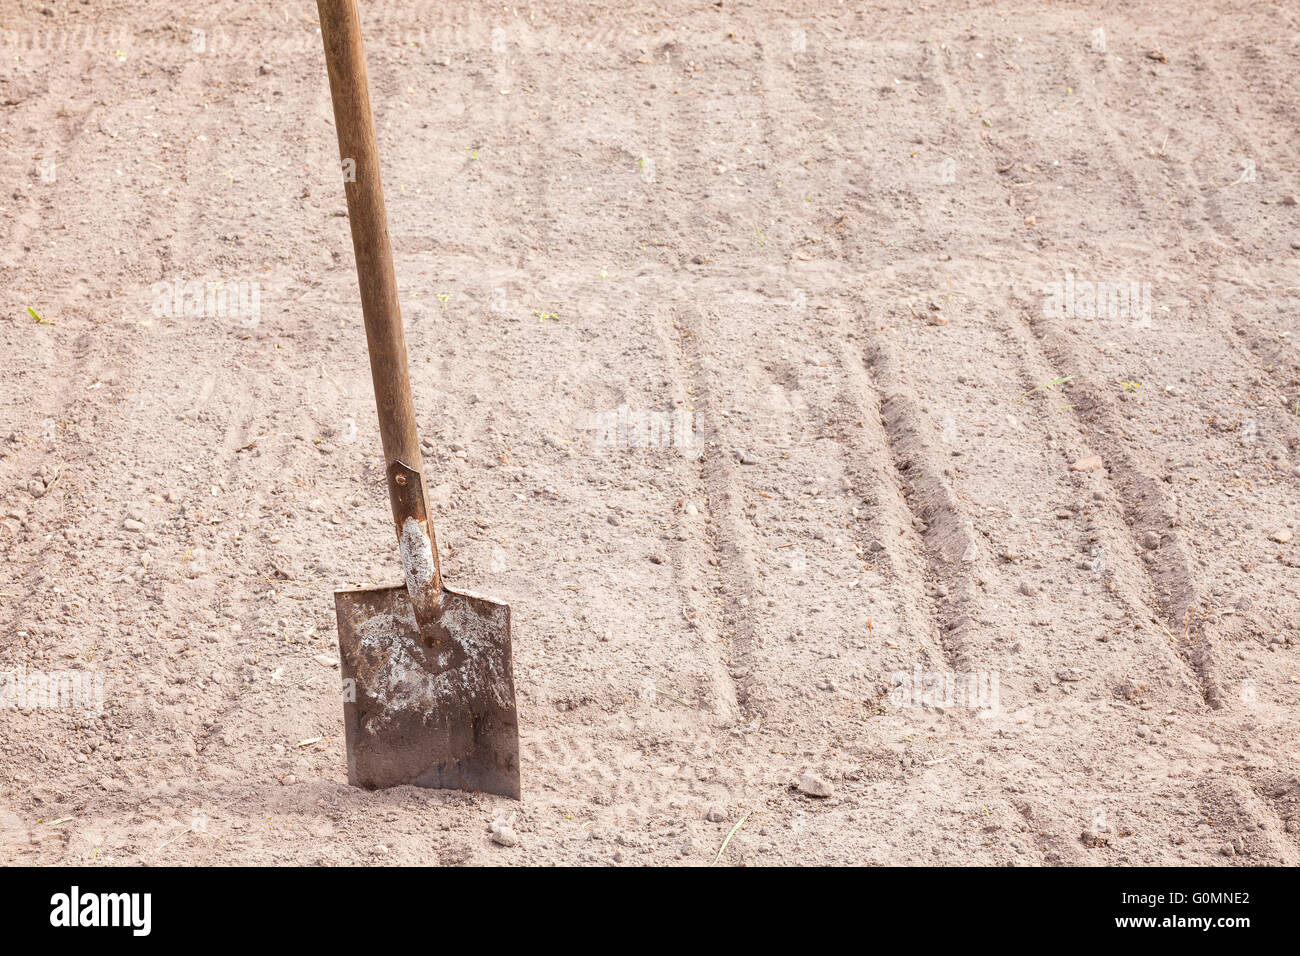 Old rusty shovel stuck into ground, shallow depth of field, space for text. Stock Photo